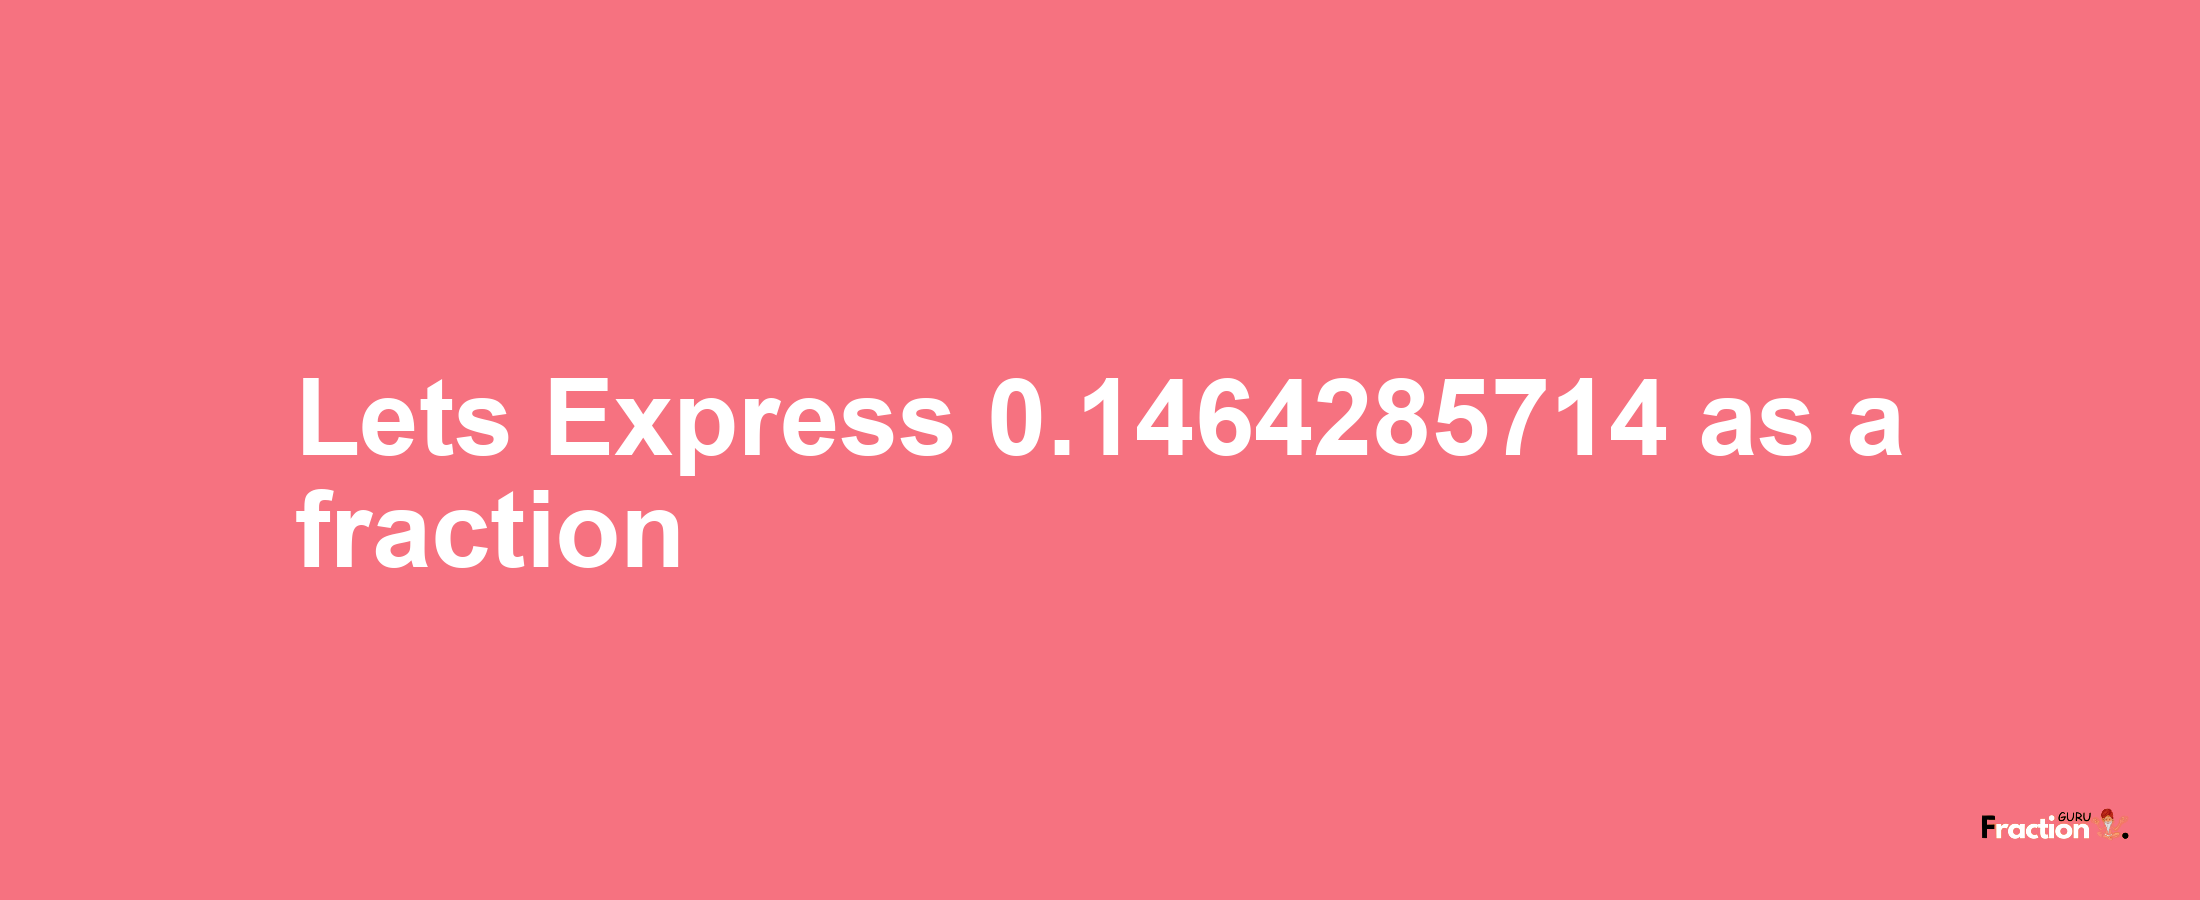 Lets Express 0.1464285714 as afraction